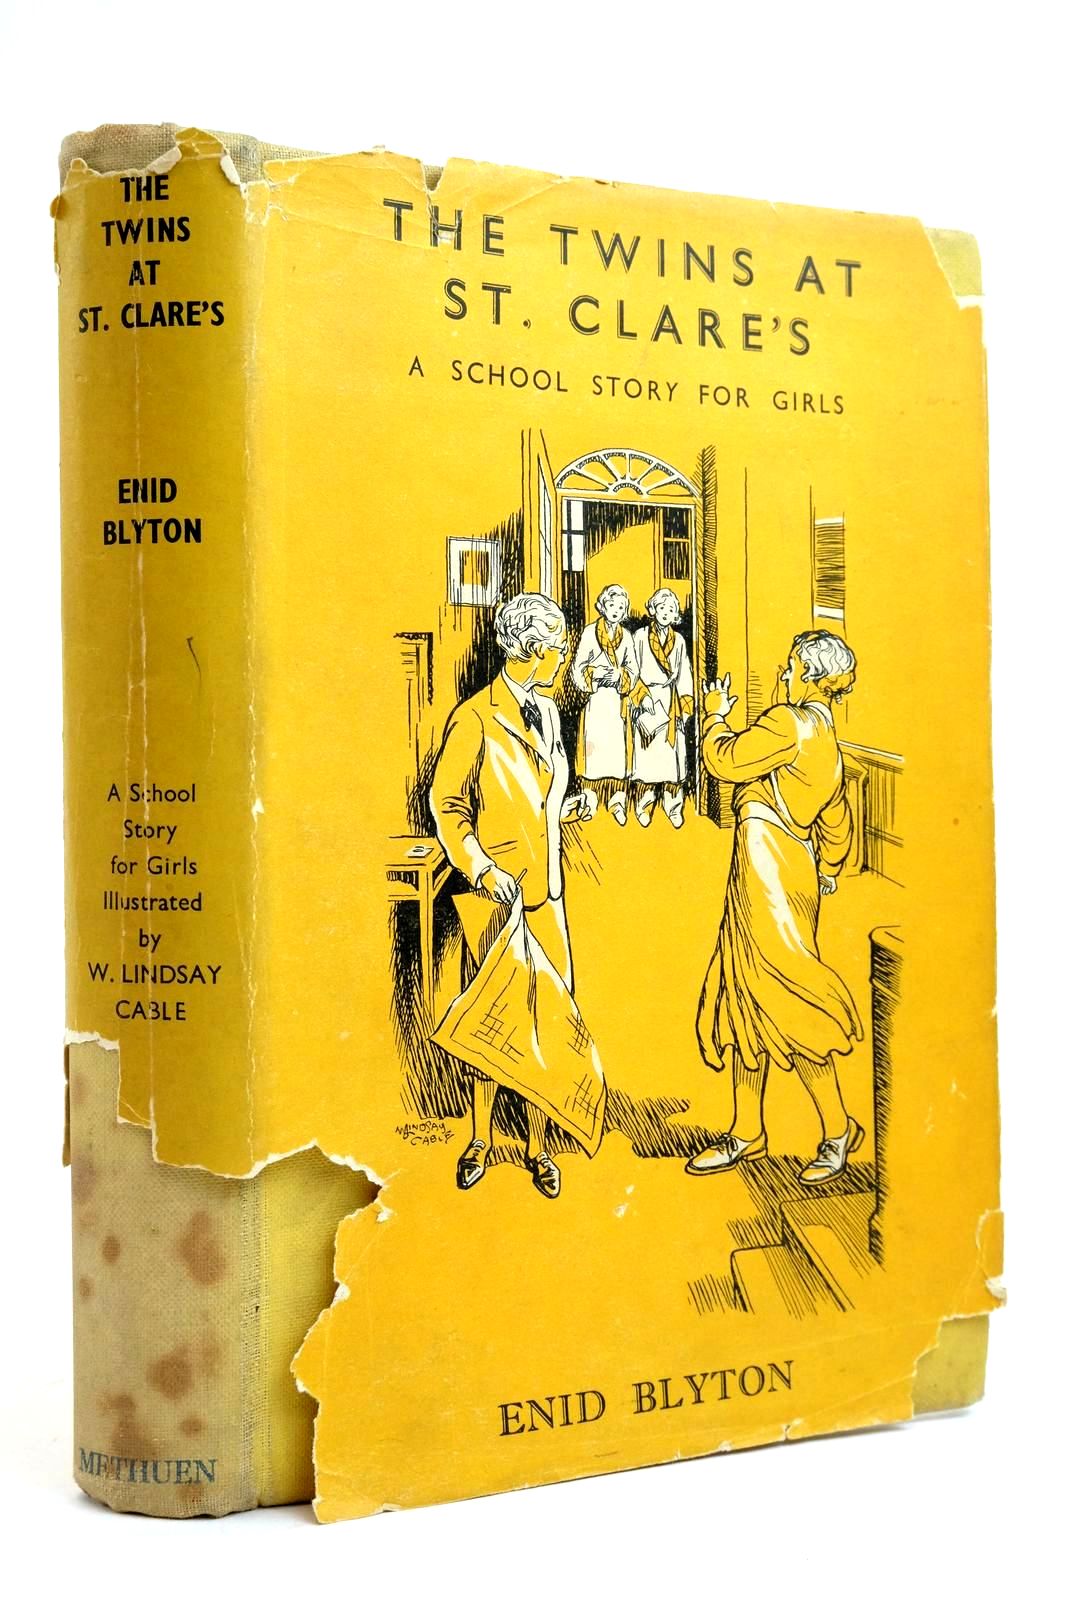 Photo of THE TWINS AT ST. CLARE'S written by Blyton, Enid illustrated by Cable, W. Lindsay published by Methuen &amp; Co. Ltd. (STOCK CODE: 2135603)  for sale by Stella & Rose's Books